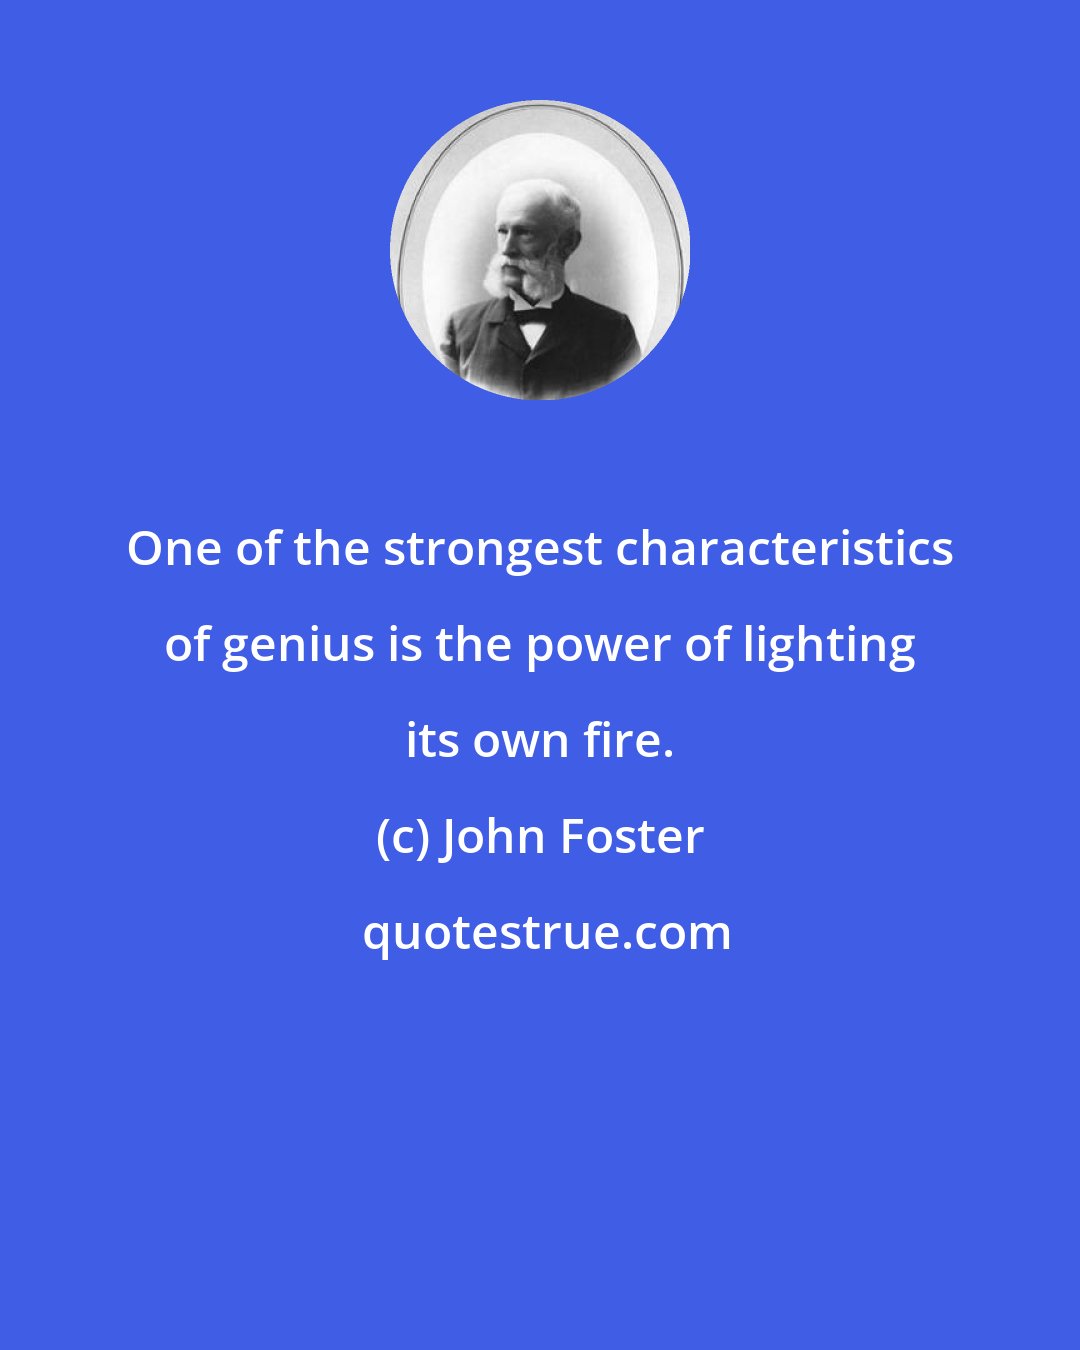 John Foster: One of the strongest characteristics of genius is the power of lighting its own fire.